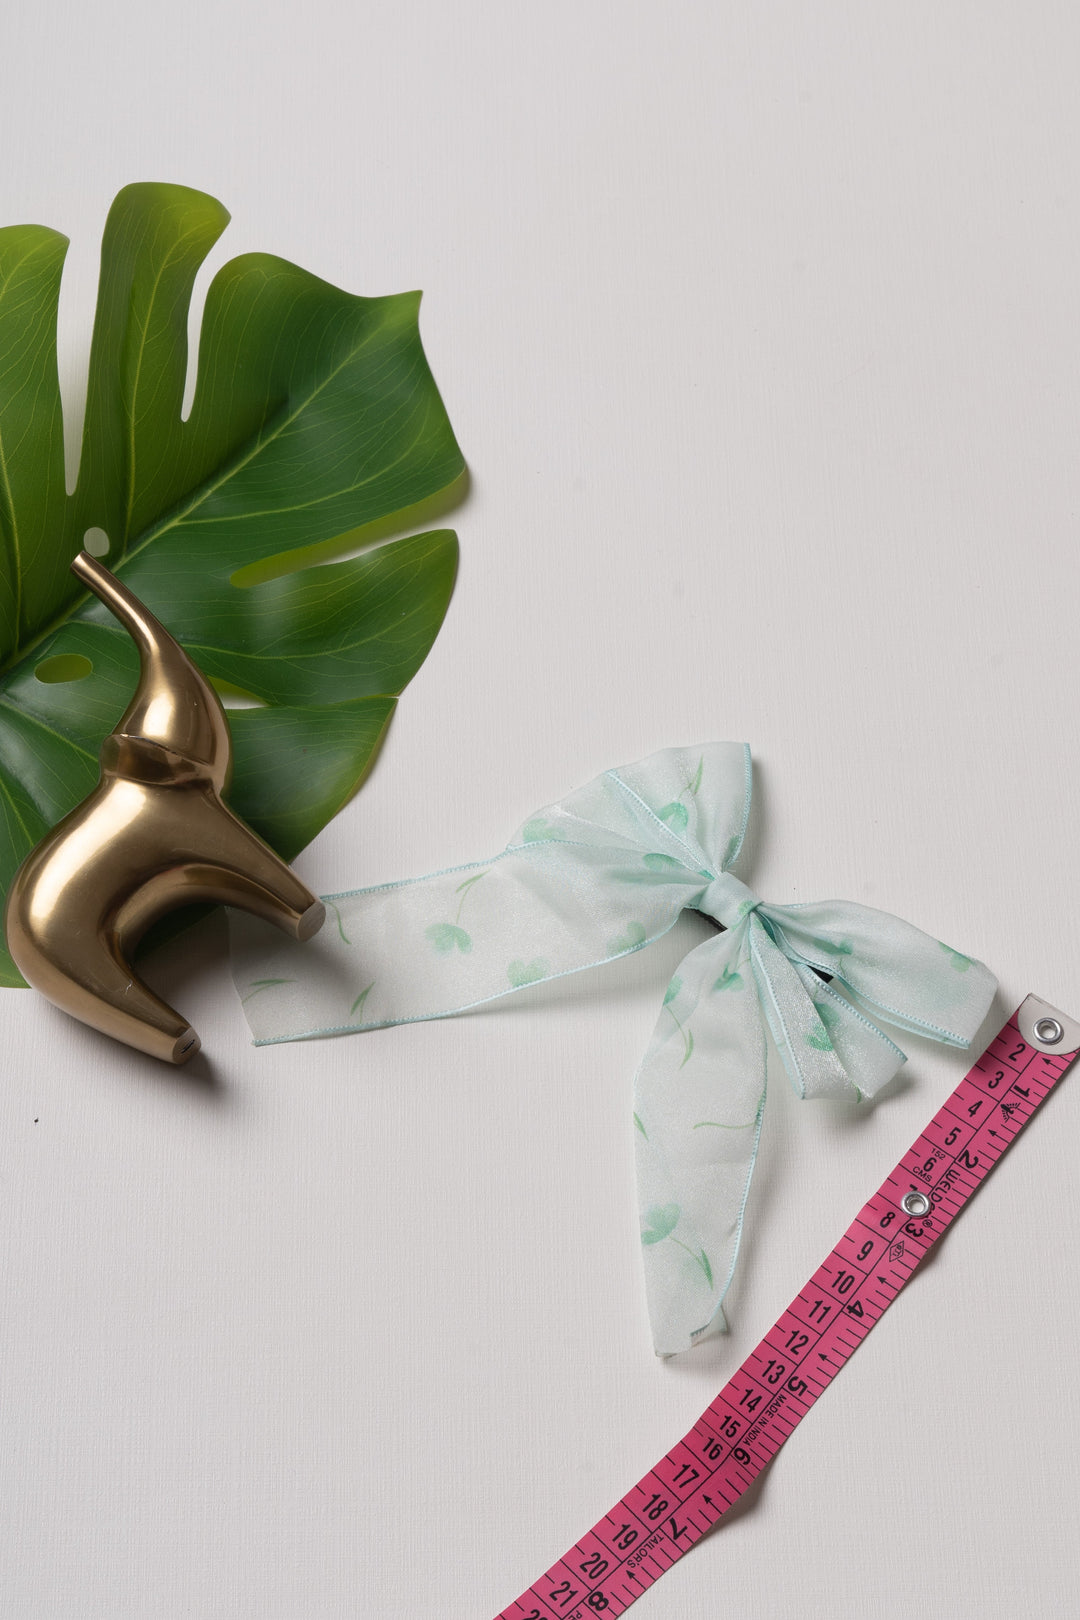 The Nesavu Hair Clip Mint Breeze Ribbon Hair Clip – A Touch of Spring for Your Little One Nesavu Green JHCL71H Mint Green Ribbon Clip for Hair | Fresh Spring-Inspired Hair Accessory for Girls | The Nesavu